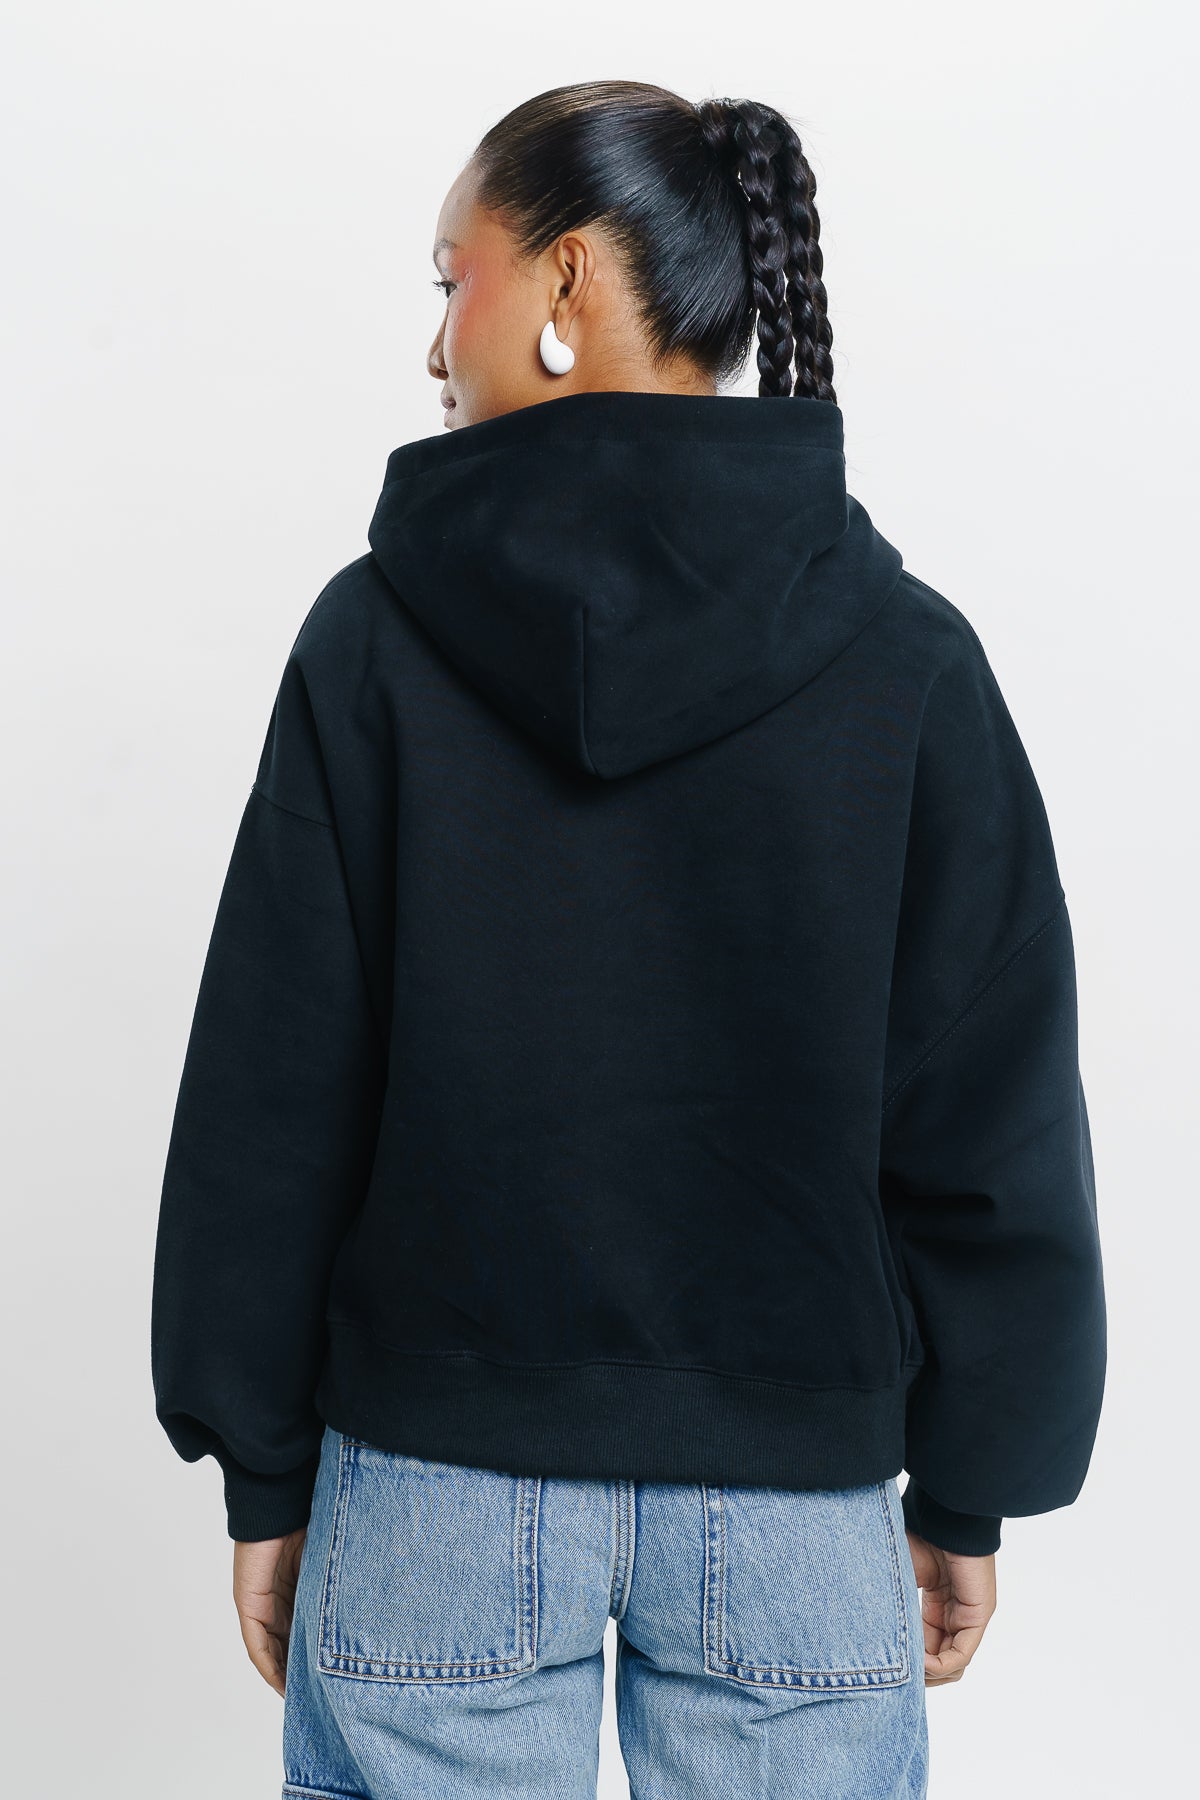 I DON'T CARE BLACK HOODIE